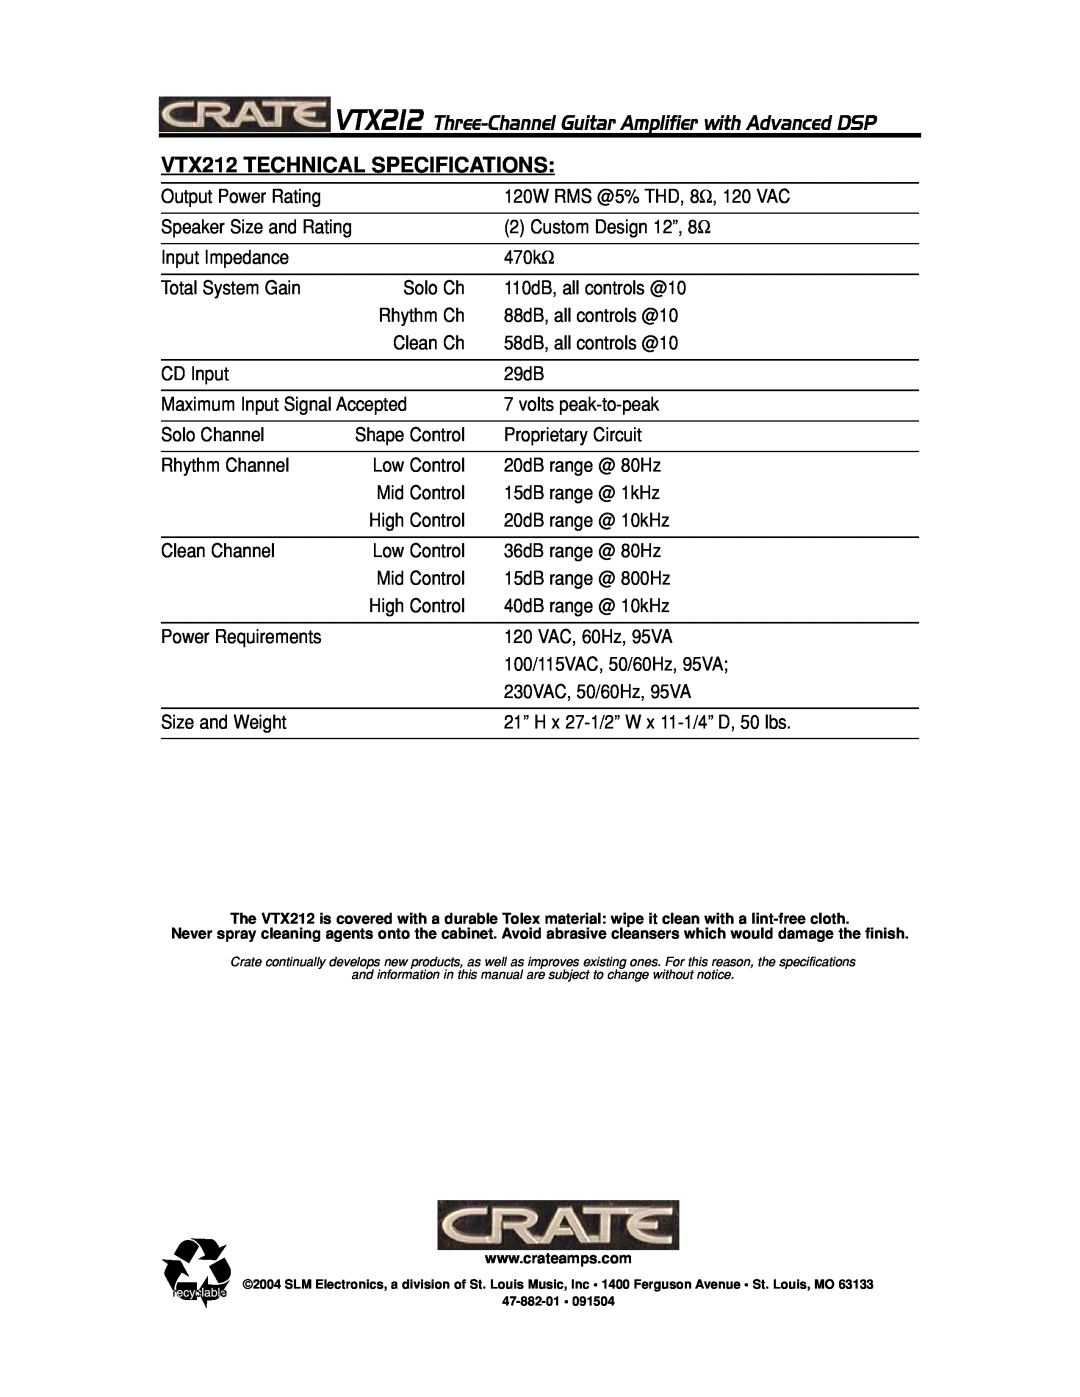 Crate Amplifiers manual VTX212 TECHNICAL SPECIFICATIONS 